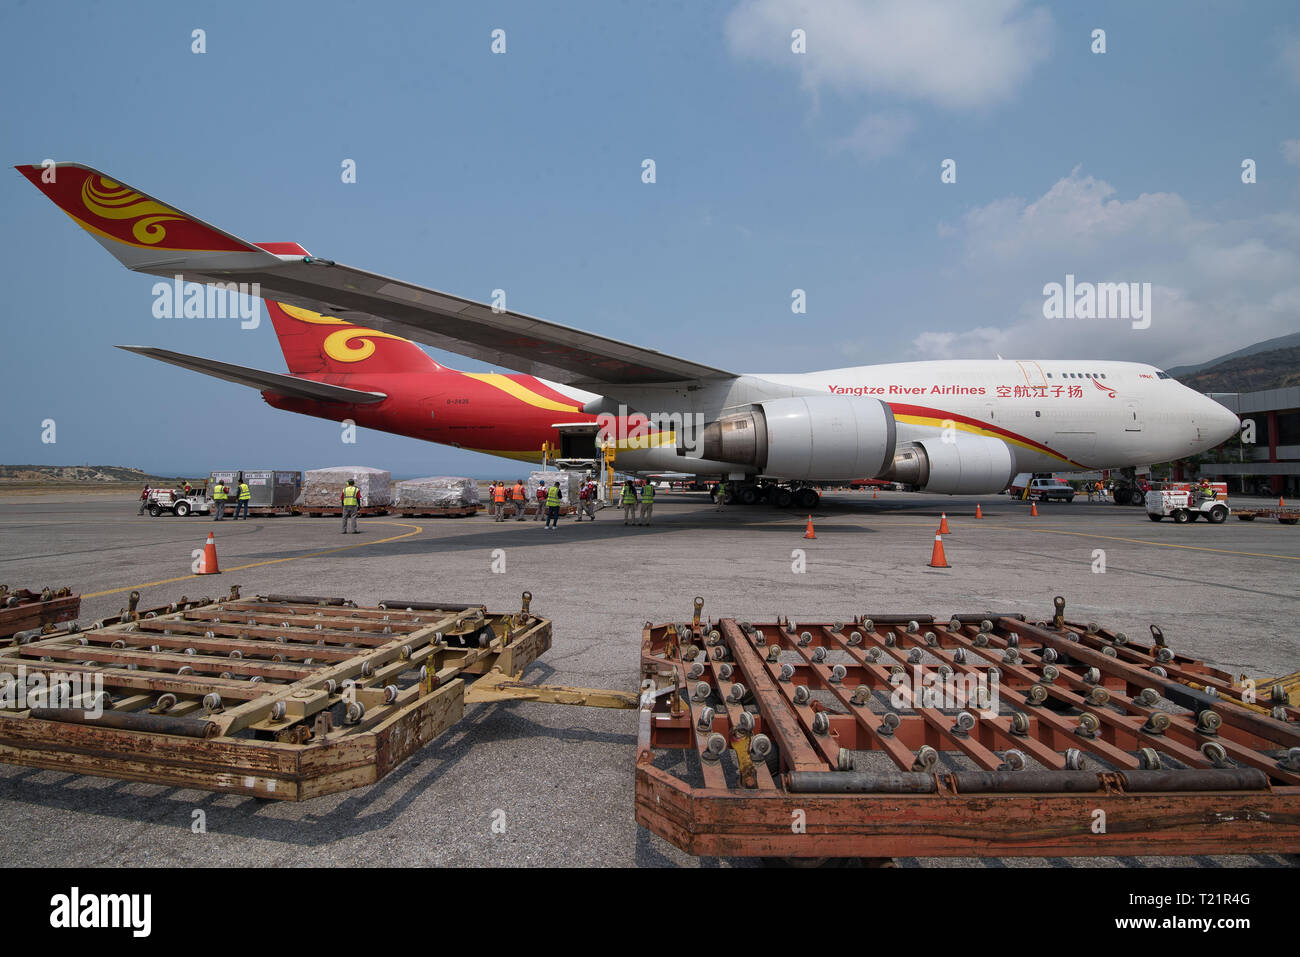 (190330) -- CARACAS, March 30, 2019 (Xinhua) -- The plane loaded with Chinese aids is seen at the Simon Bolivar International Airport in Maiquetia in the state of Vargas, Venezuela, on March 29, 2019. The Venezuelan government received on Friday medical aid from China. (Xinhua/Marcos Salgado) Stock Photo